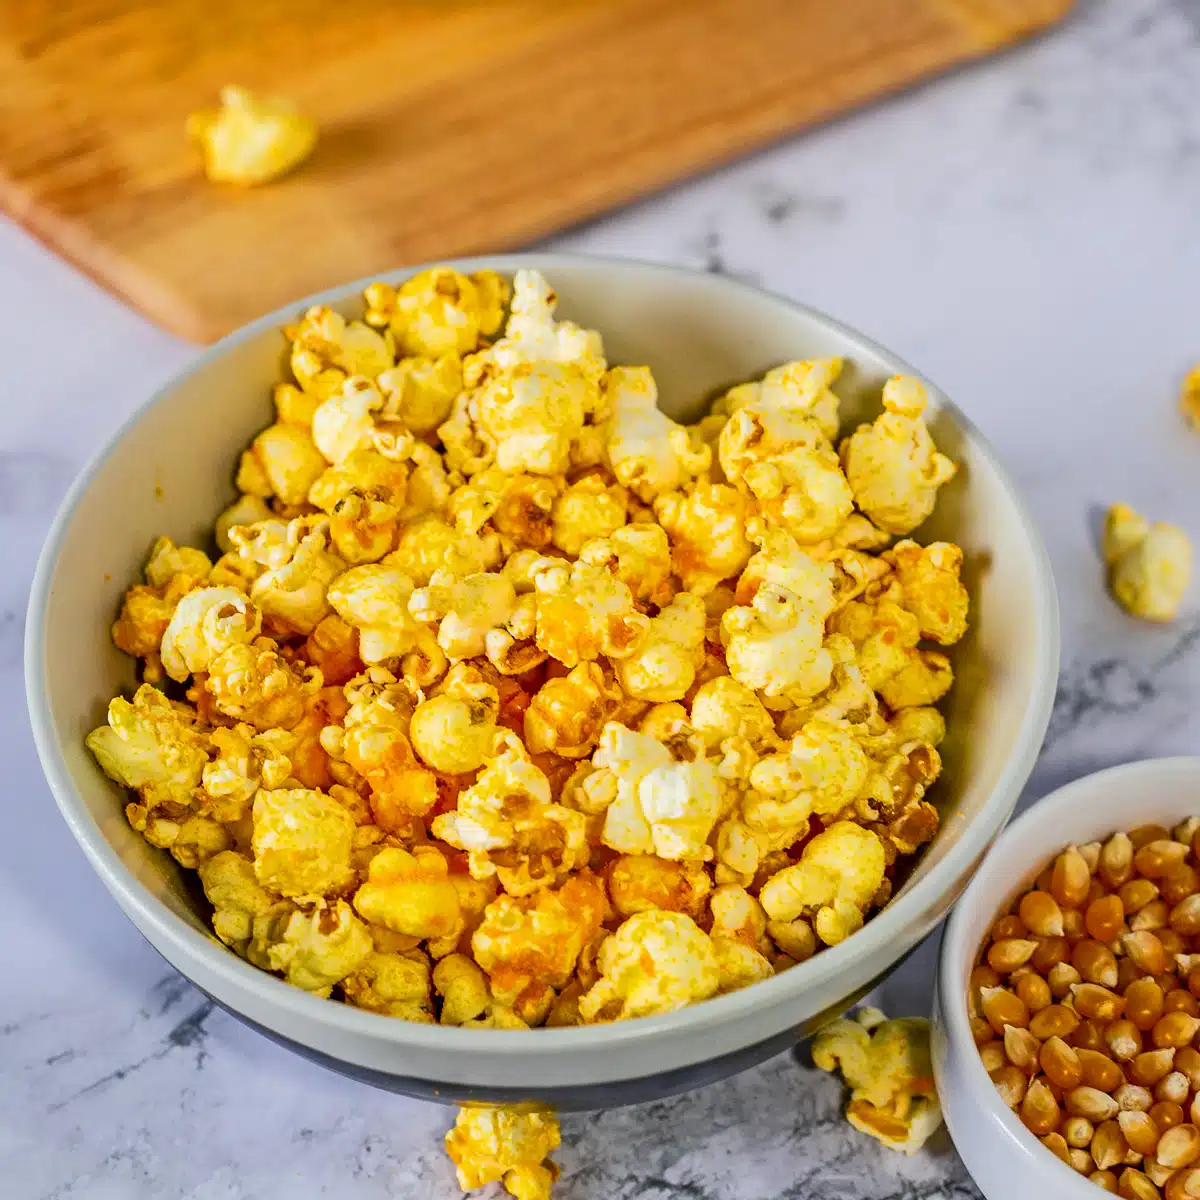 Cheddar popcorn with scattered popcorn on a light marble surface and a bowl of yellow popcorn kernels near it.